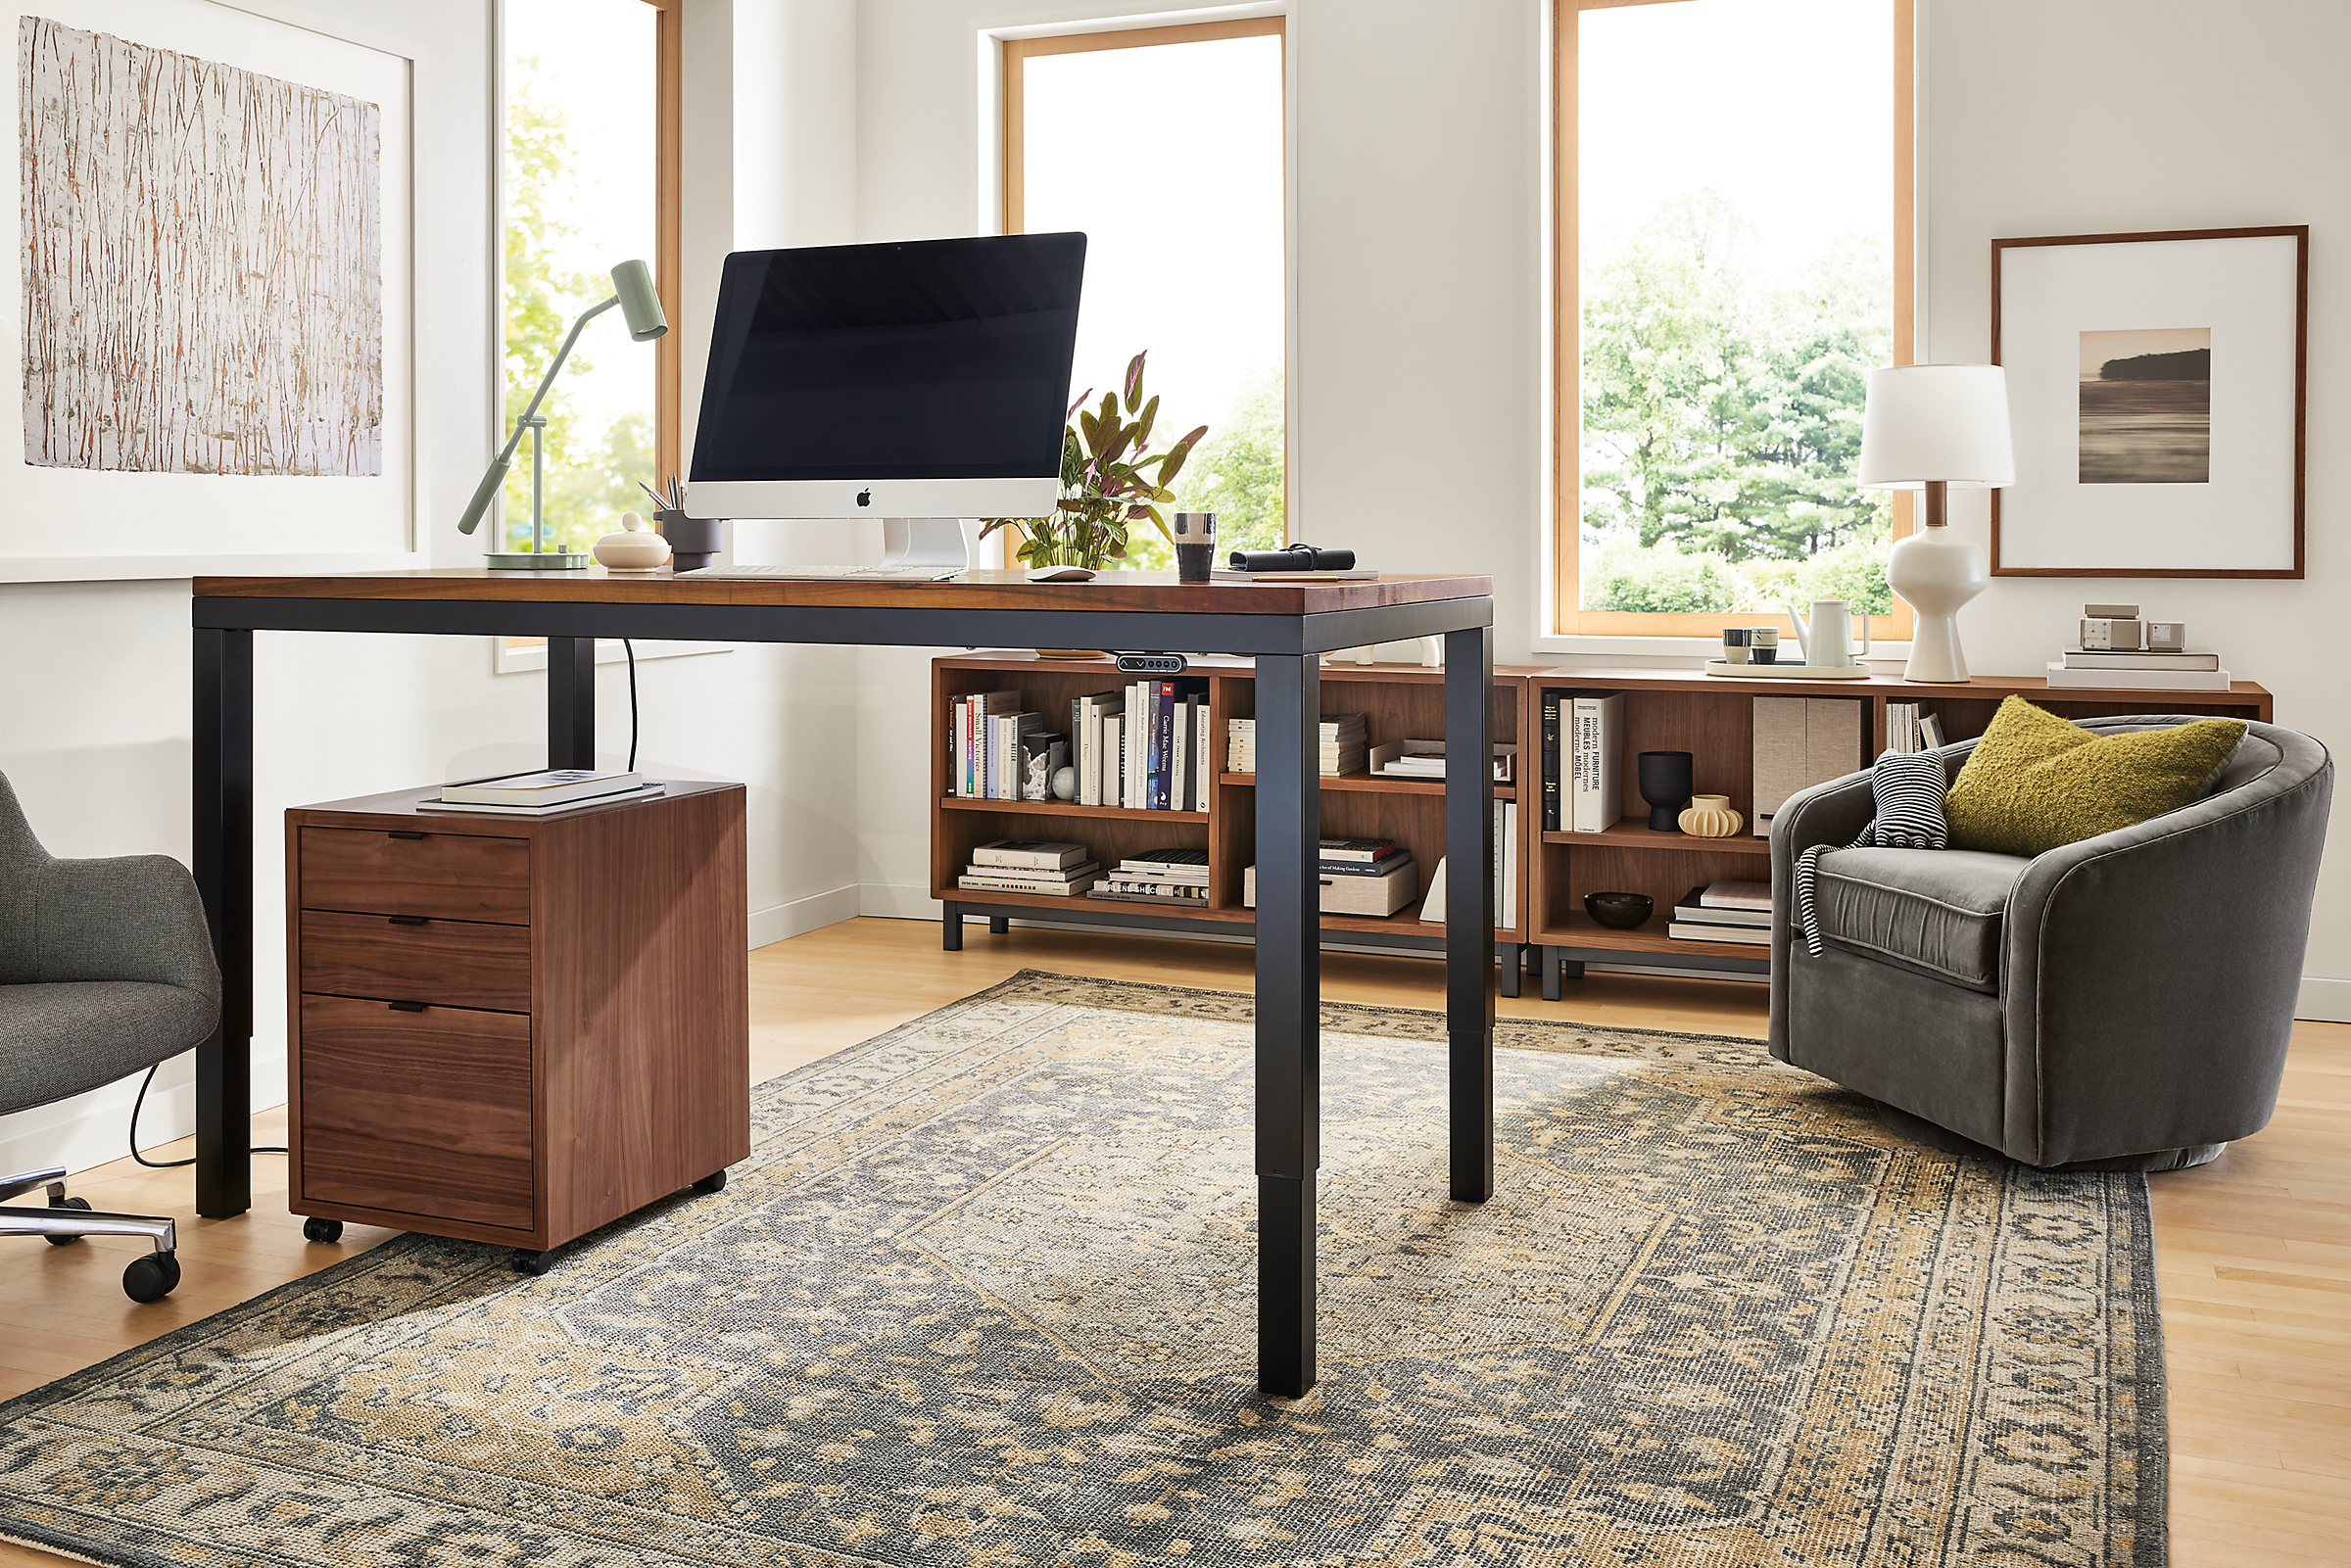 Office area with Parsons Adjustable height standing desk in graphite and walnut in standing position, Copenhagen file cabinet and Veda rug.